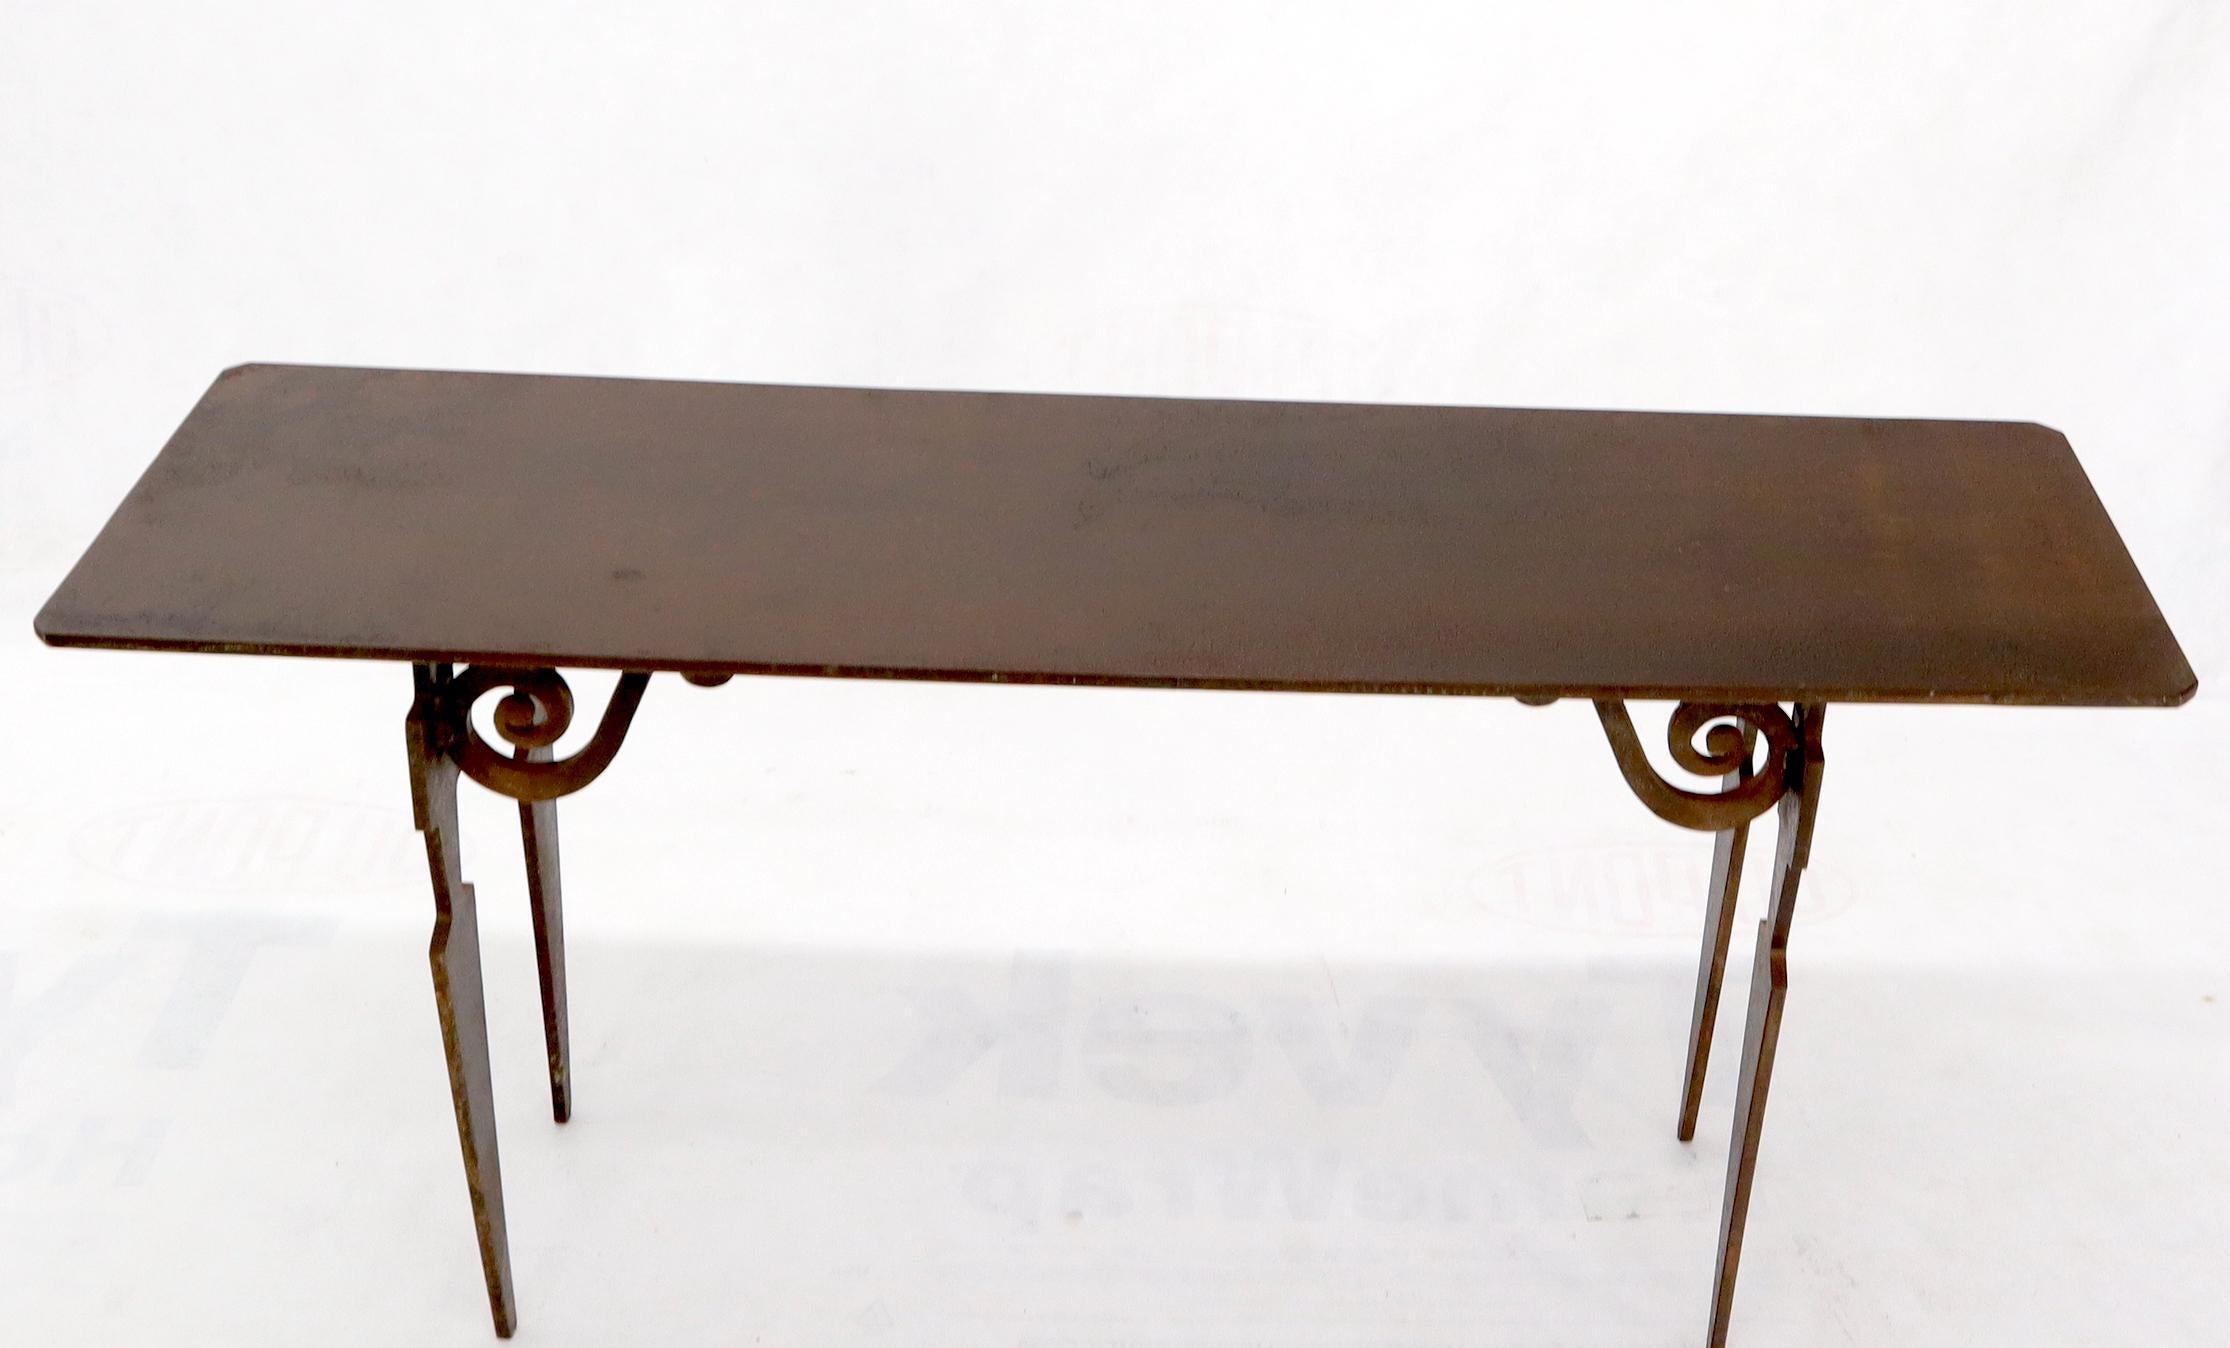 Thick Solid Steel Plate Top Cut Steel Legs Coffee Table Steam Punk Console Table In Excellent Condition For Sale In Rockaway, NJ